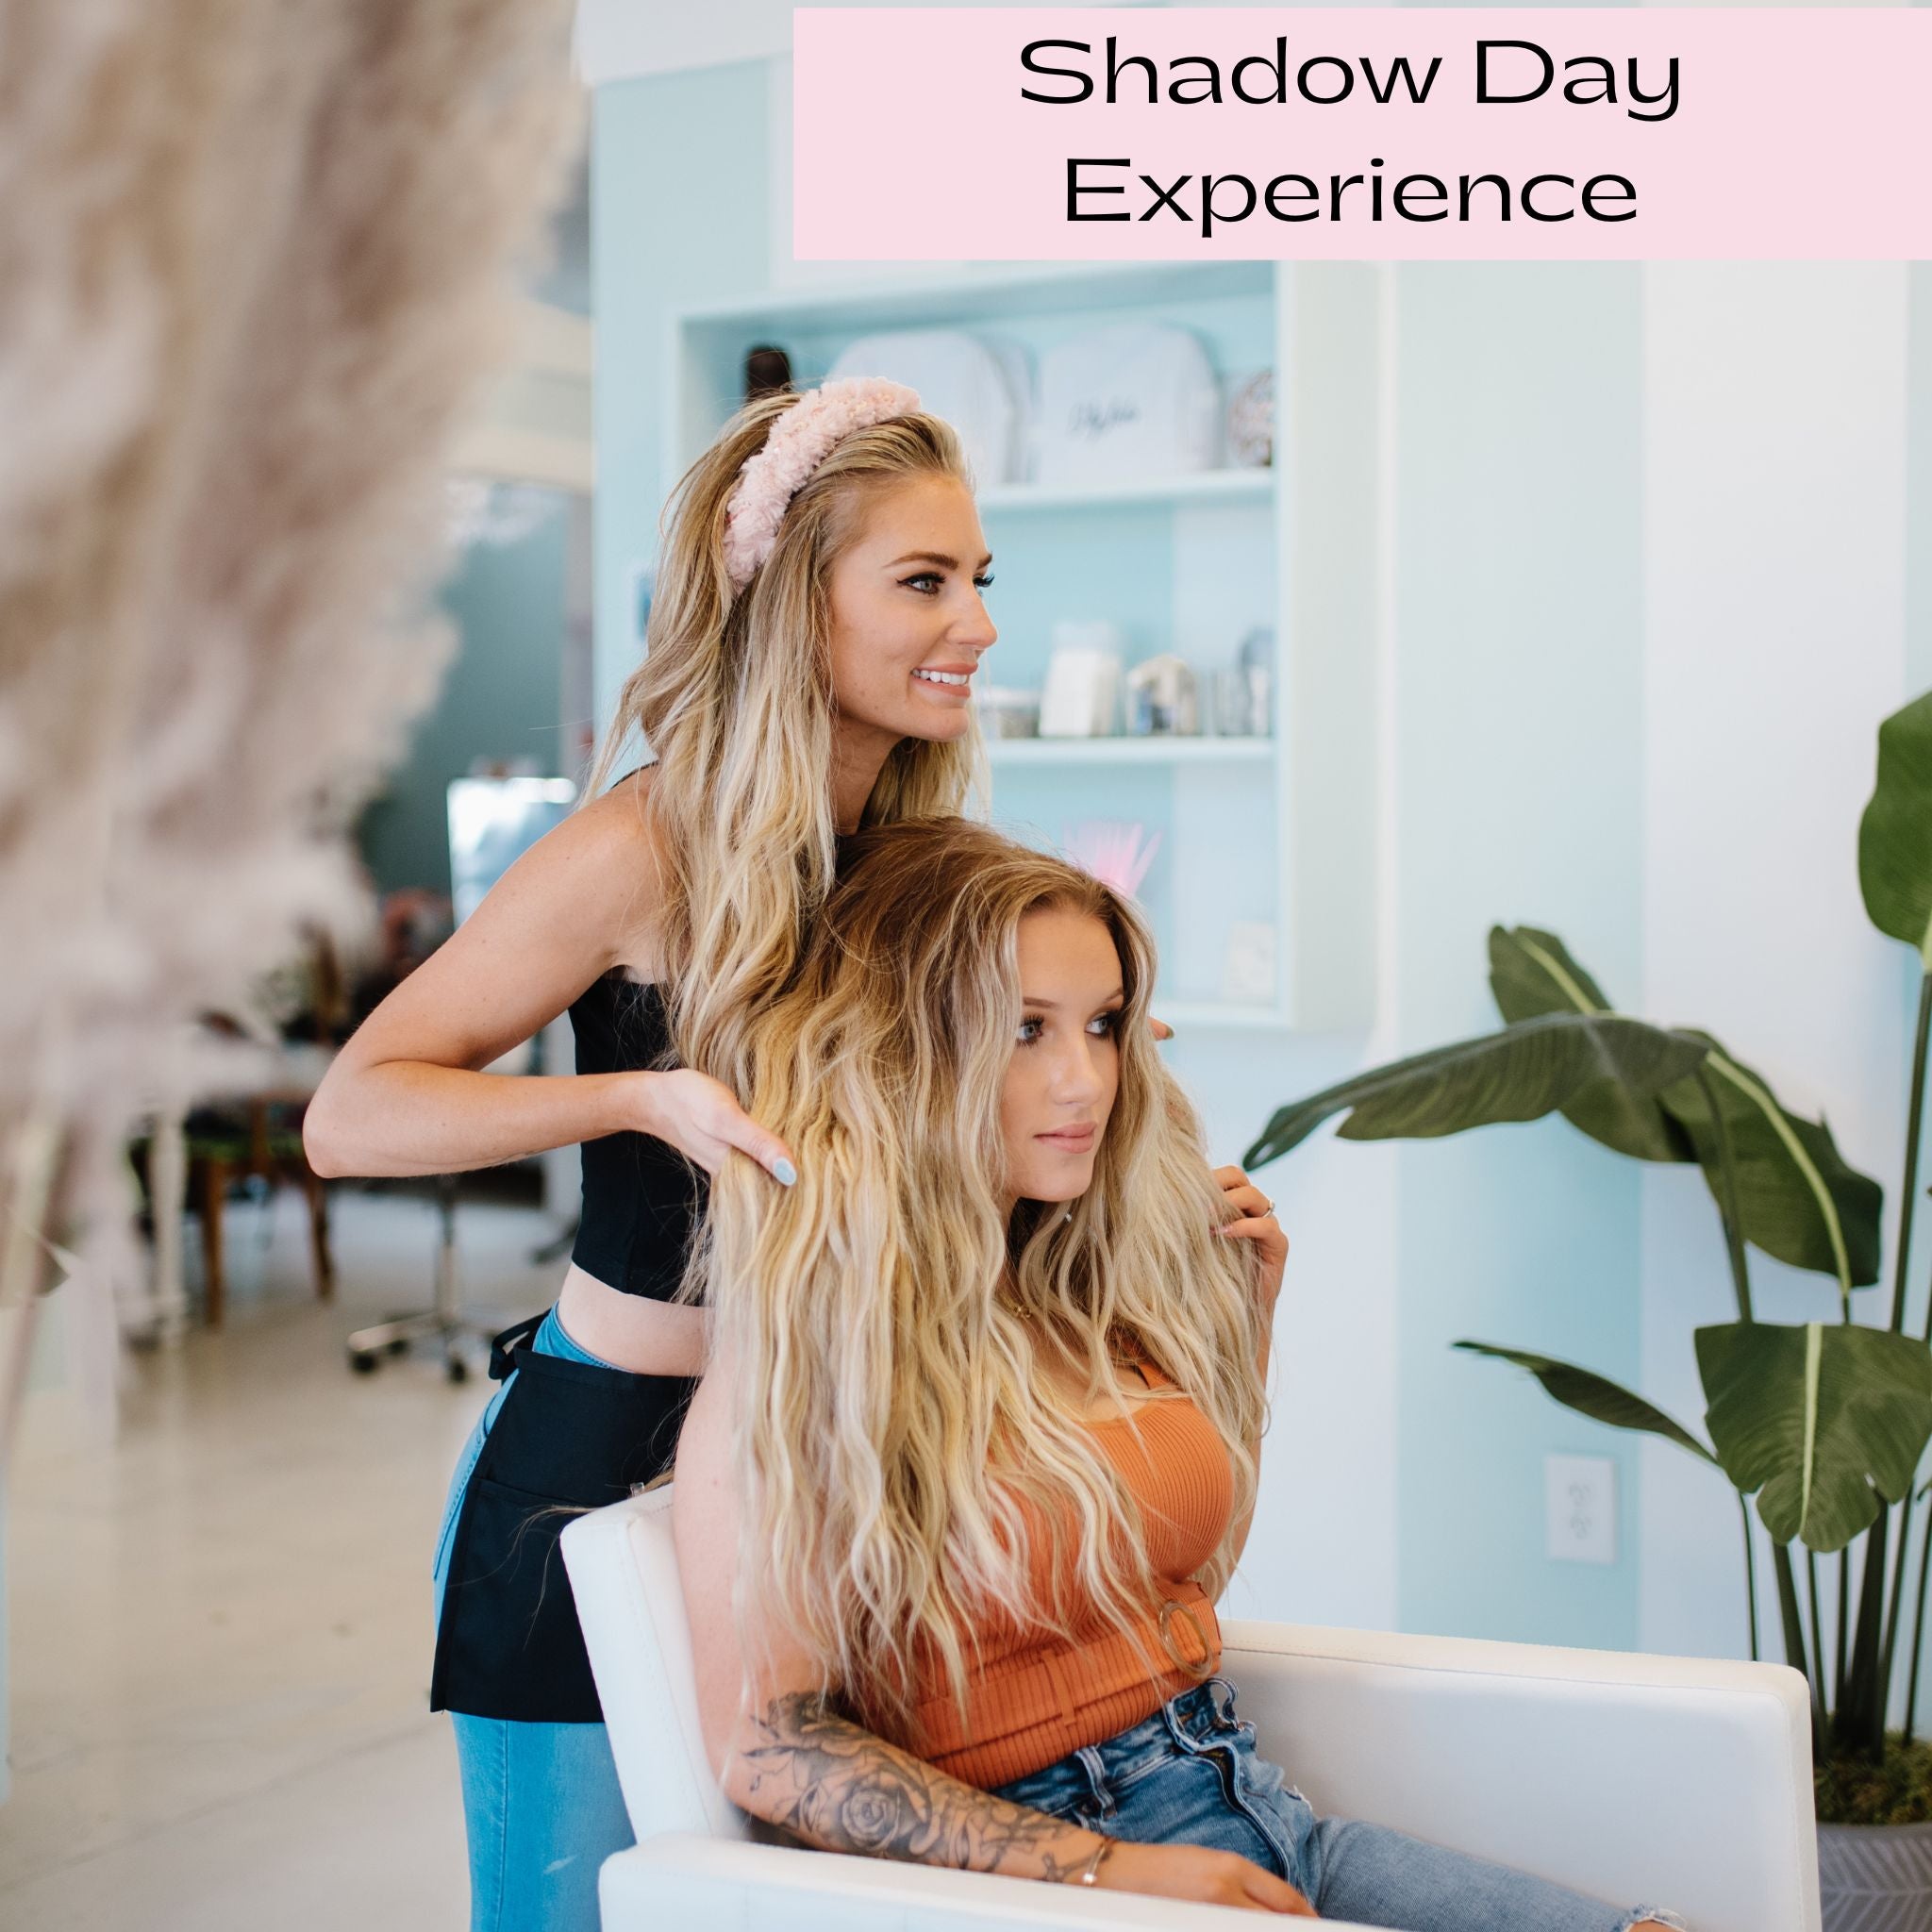 Happa Hunny Hair Extension Course – Happa Hunny Hair Extensions